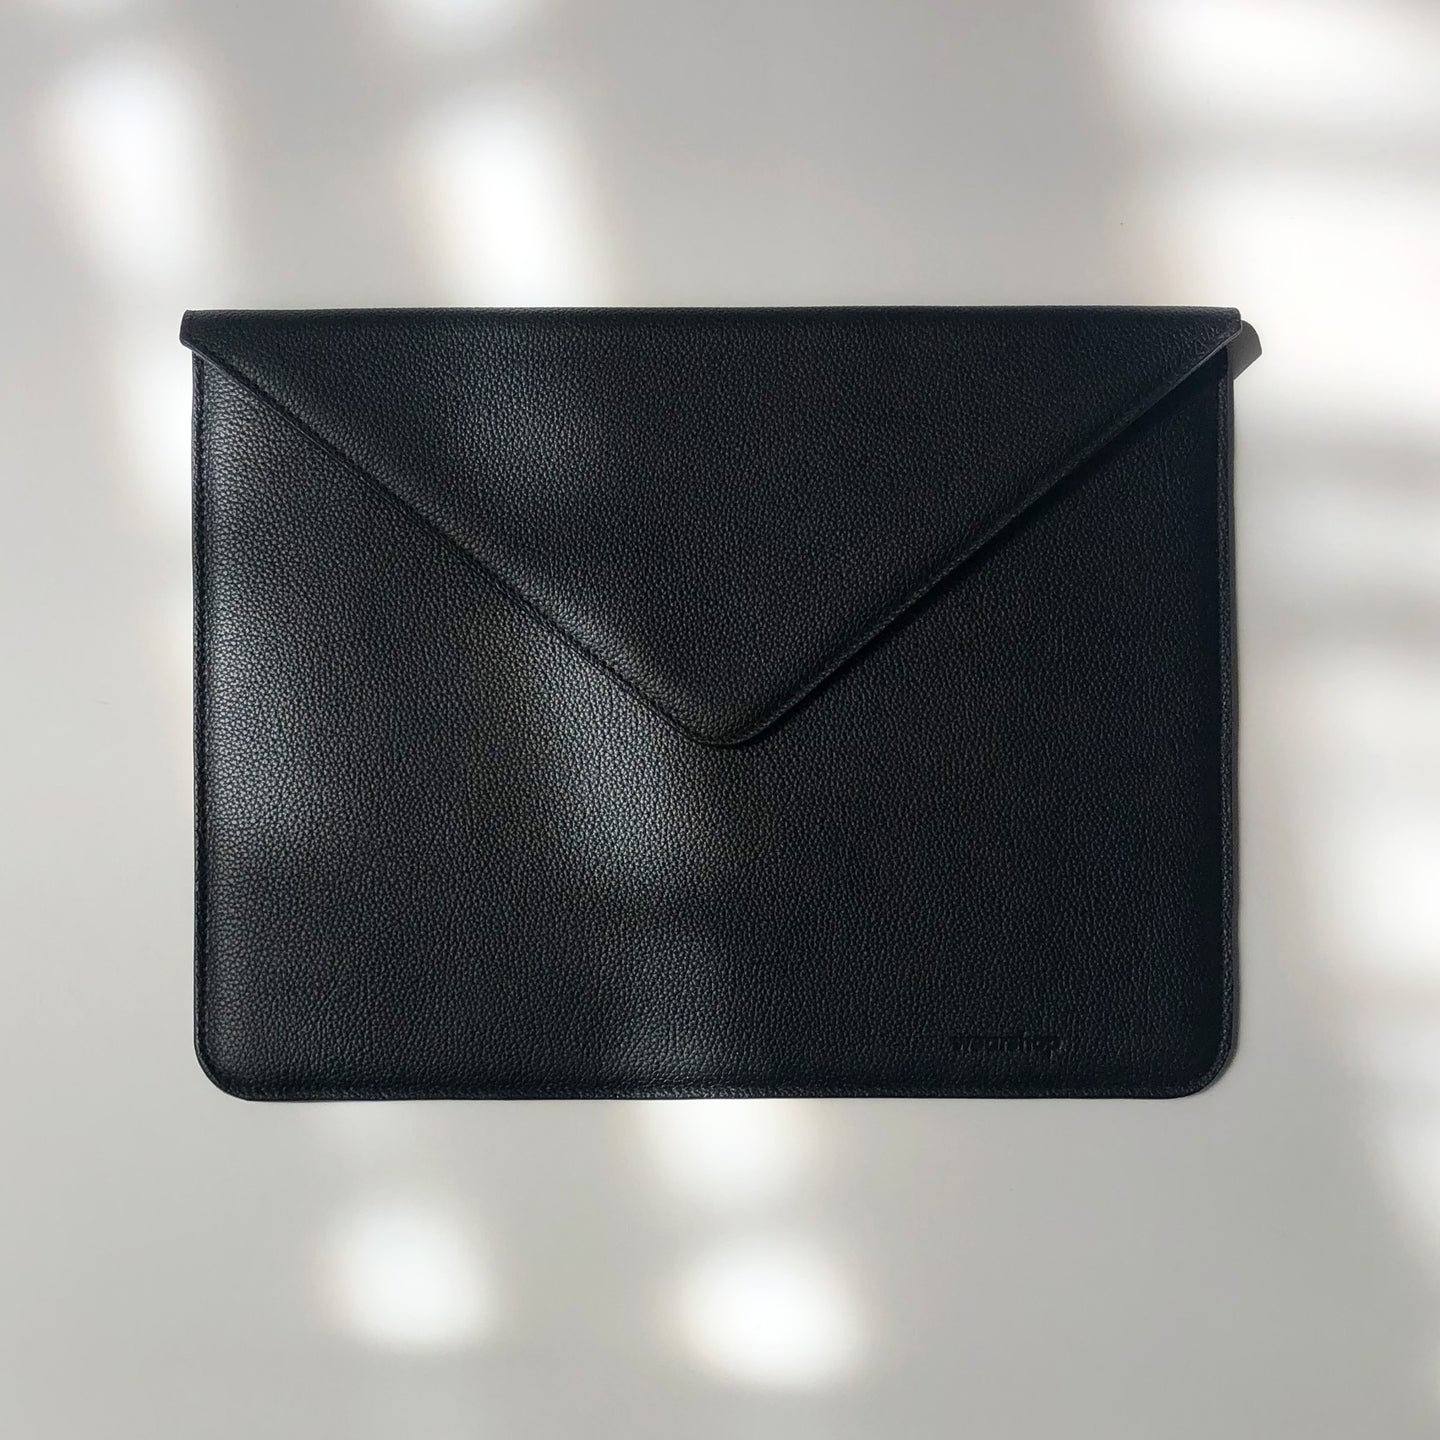 Laptop case for 13'' or document case. Italian black colour leather, fully lined, padded for protection. Made in Canada.